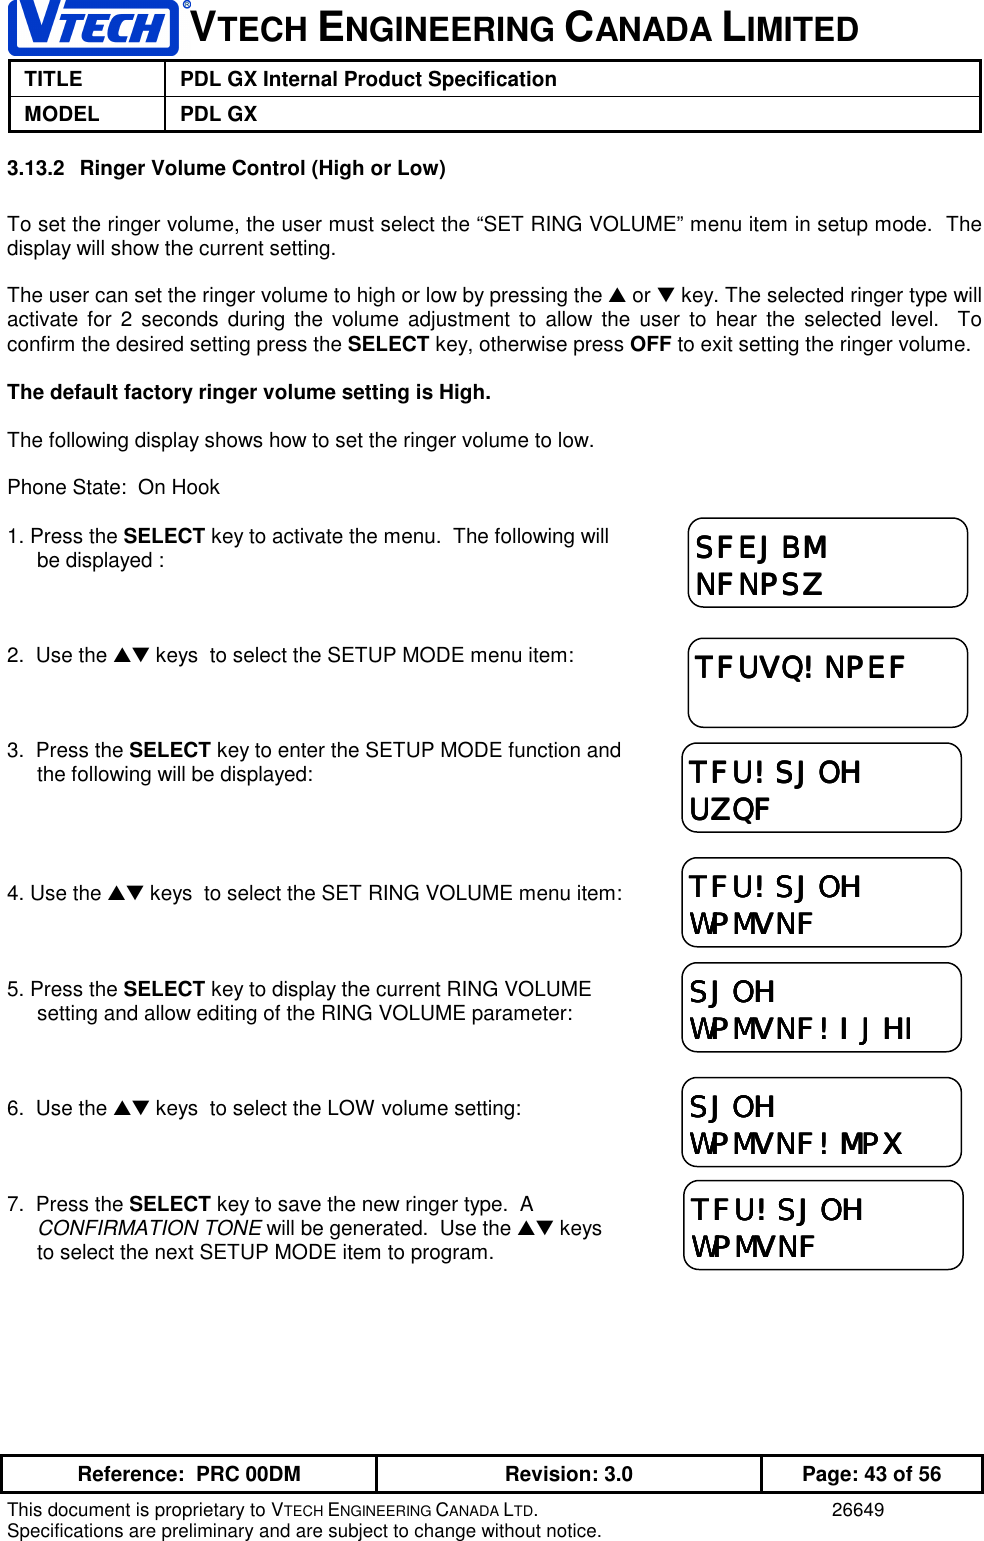 VTECH ENGINEERING CANADA LIMITEDTITLE PDL GX Internal Product SpecificationMODEL PDL GXReference:  PRC 00DM Revision: 3.0 Page: 43 of 56This document is proprietary to VTECH ENGINEERING CANADA LTD. 26649Specifications are preliminary and are subject to change without notice.3.13.2  Ringer Volume Control (High or Low)To set the ringer volume, the user must select the “SET RING VOLUME” menu item in setup mode.  Thedisplay will show the current setting.The user can set the ringer volume to high or low by pressing the ▲ or ▼ key. The selected ringer type willactivate for 2 seconds during the volume adjustment to allow the user to hear the selected level.  Toconfirm the desired setting press the SELECT key, otherwise press OFF to exit setting the ringer volume.The default factory ringer volume setting is High.The following display shows how to set the ringer volume to low.Phone State:  On Hook1. Press the SELECT key to activate the menu.  The following willbe displayed :2.  Use the ▲▼ keys  to select the SETUP MODE menu item:3.  Press the SELECT key to enter the SETUP MODE function andthe following will be displayed:4. Use the ▲▼ keys  to select the SET RING VOLUME menu item:5. Press the SELECT key to display the current RING VOLUMEsetting and allow editing of the RING VOLUME parameter:6.  Use the ▲▼ keys  to select the LOW volume setting:7.  Press the SELECT key to save the new ringer type.  ACONFIRMATION TONE will be generated.  Use the ▲▼ keysto select the next SETUP MODE item to program.TFUVQ!NPEFTFUVQ!NPEFTFUVQ!NPEFTFUVQ!NPEFTFU!SJOHTFU!SJOHTFU!SJOHTFU!SJOHUZQFUZQFUZQFUZQFTFU!SJOHTFU!SJOHTFU!SJOHTFU!SJOHWPMVNFWPMVNFWPMVNFWPMVNFSFEJBMSFEJBMSFEJBMSFEJBMNFNPSZNFNPSZNFNPSZNFNPSZSJOHSJOHSJOHSJOHWPMVNF!IJHIWPMVNF!IJHIWPMVNF!IJHIWPMVNF!IJHITFU!SJOHTFU!SJOHTFU!SJOHTFU!SJOHWPMVNFWPMVNFWPMVNFWPMVNFSJOHSJOHSJOHSJOHWPMVNF!MPXWPMVNF!MPXWPMVNF!MPXWPMVNF!MPX